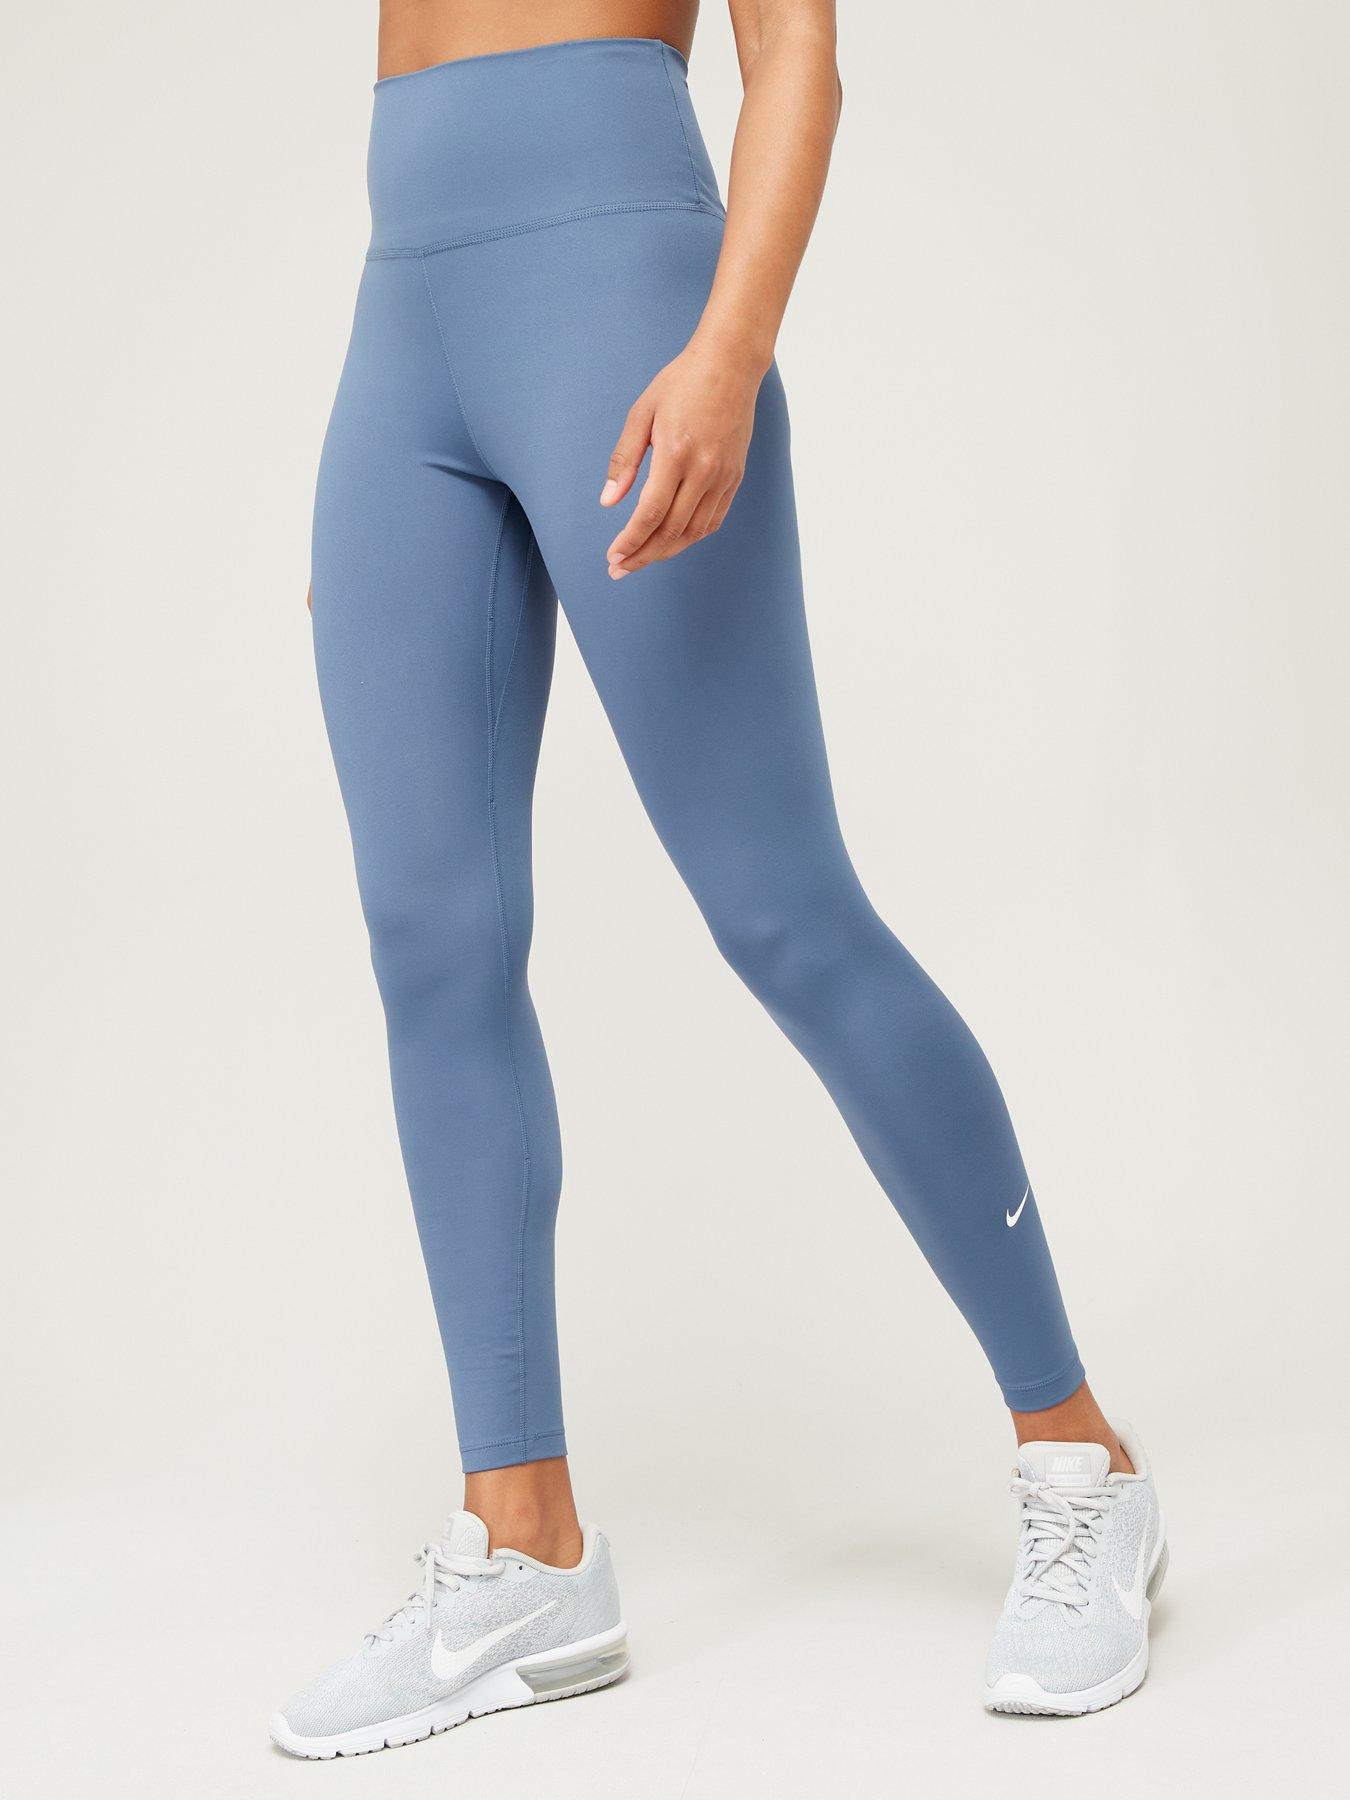 Nike Womens Mid-Rise 7/8 Running Leggings with Pockets